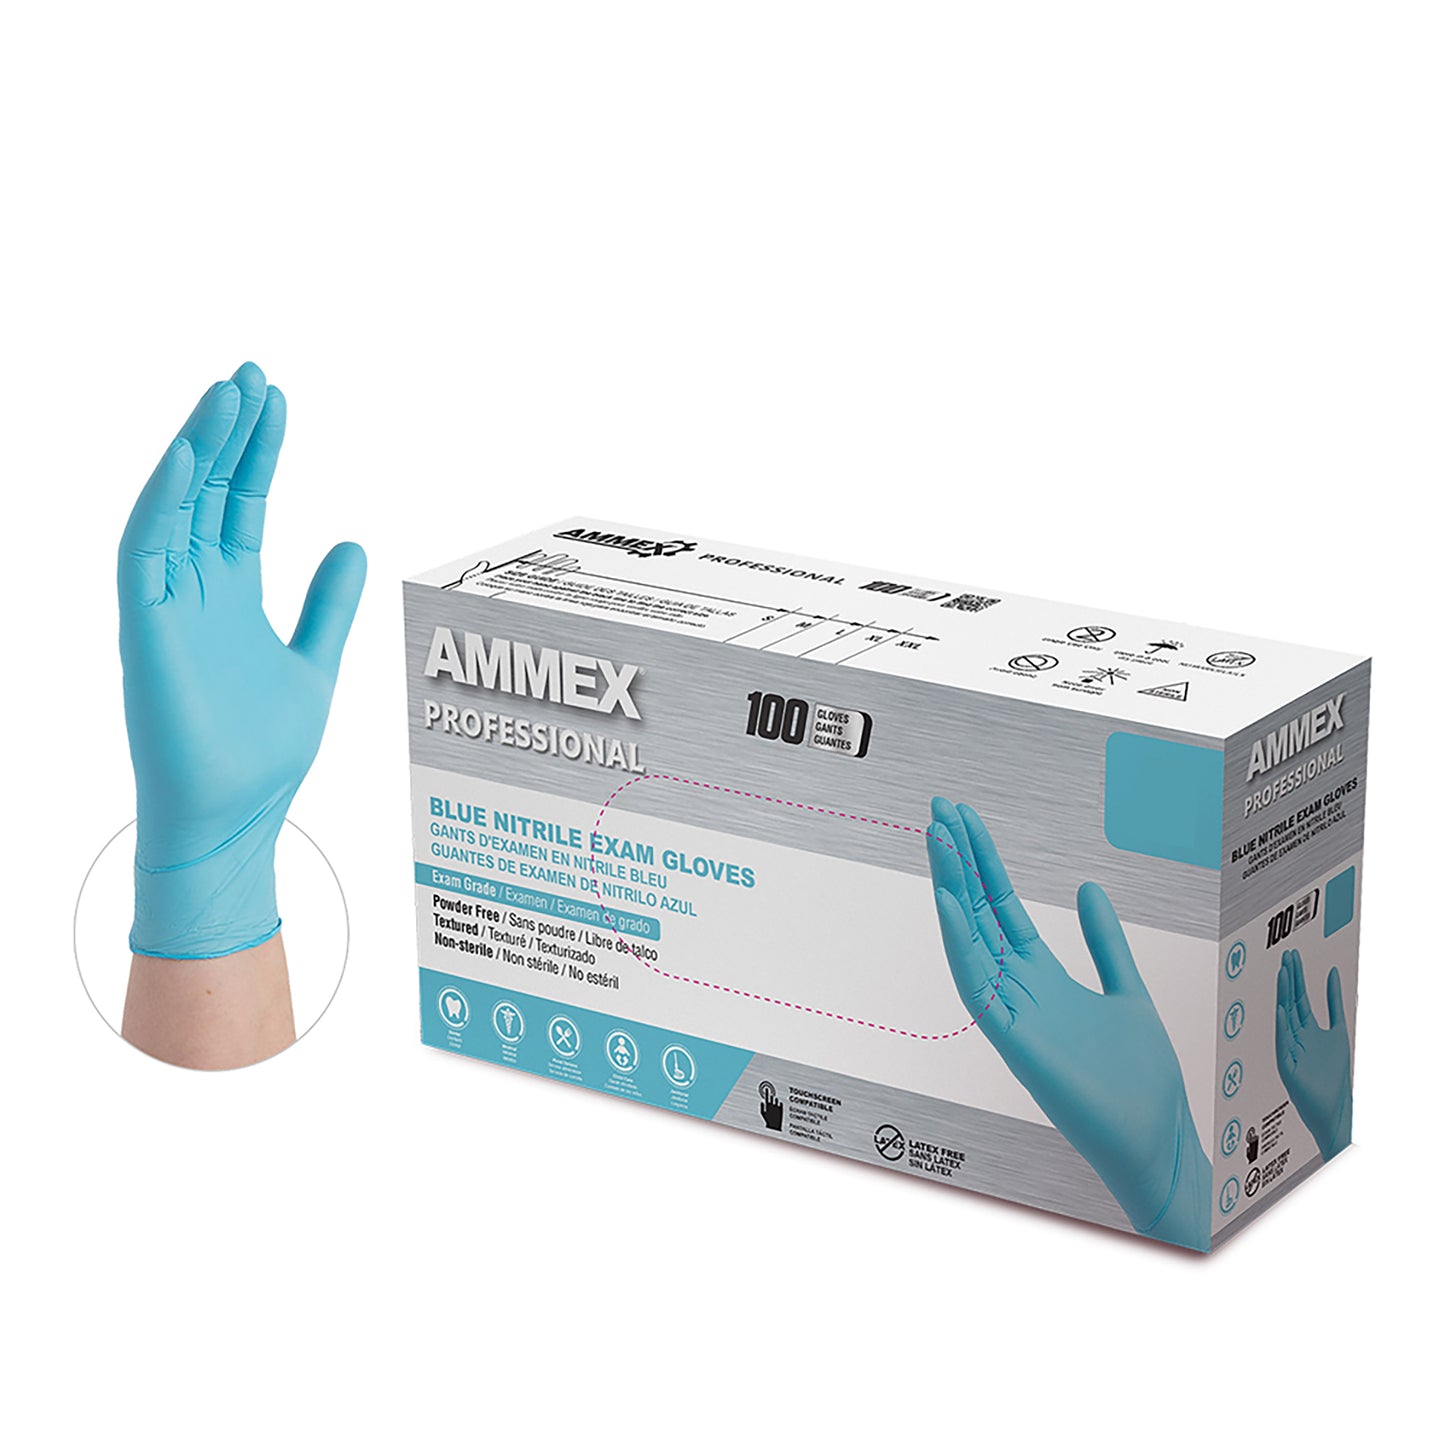 AMMEX Professional Light Blue Nitrile, Small, Case of 1000